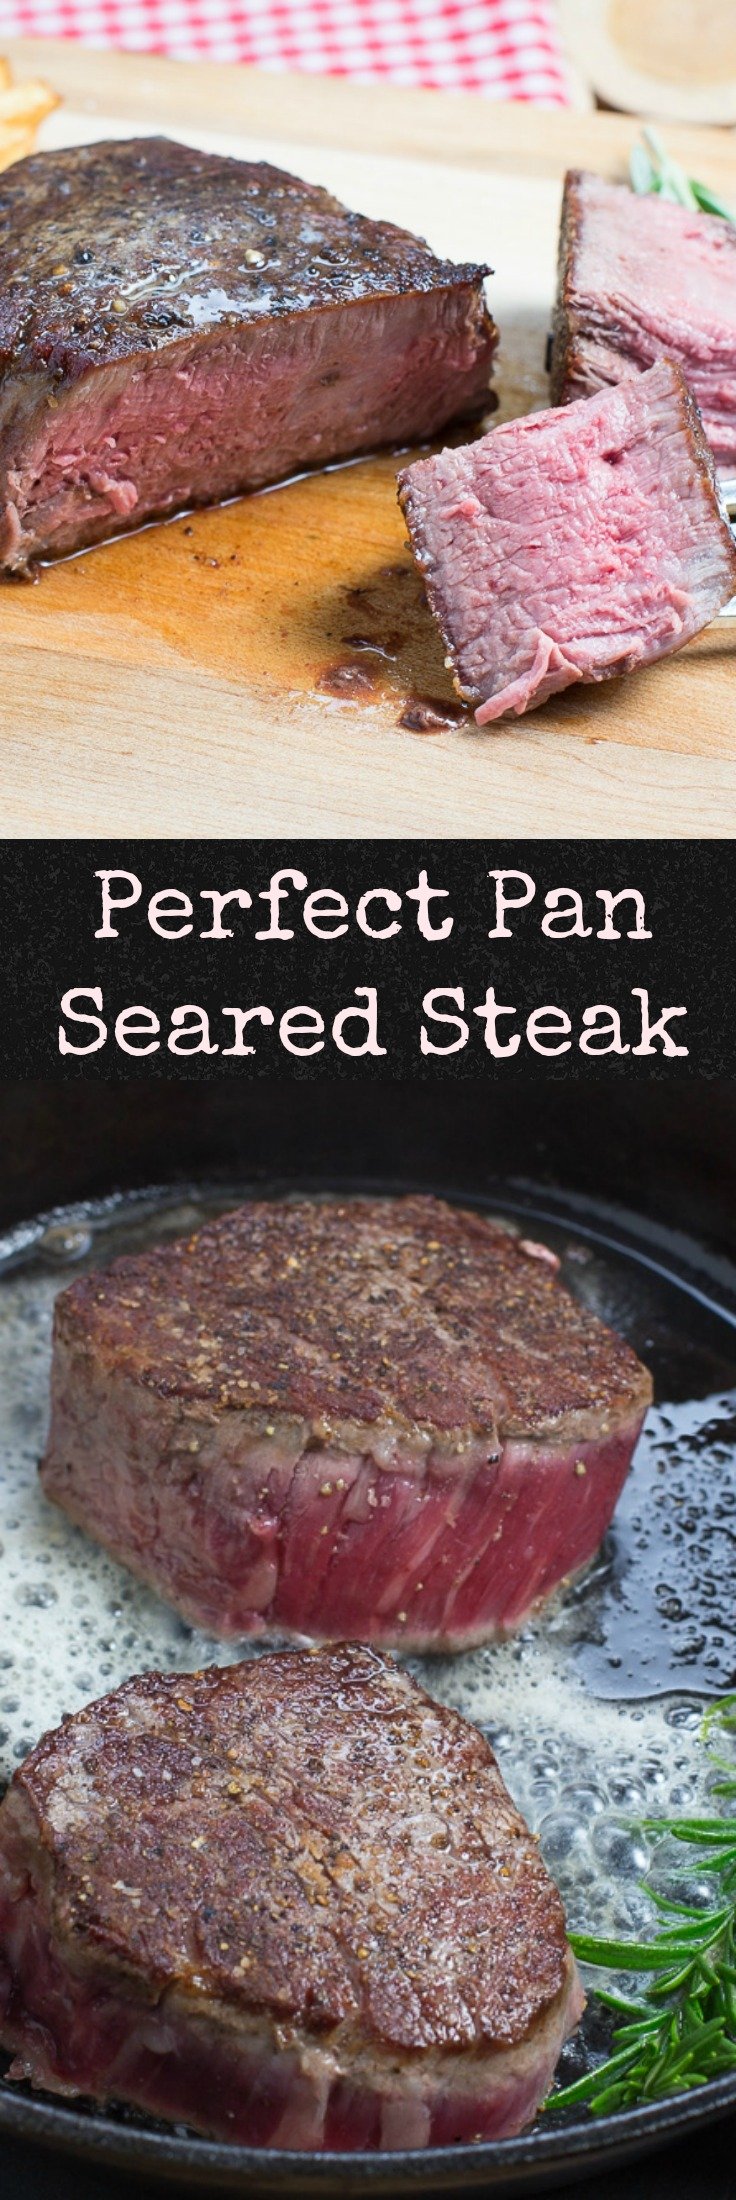 Make perfect, mouthwatering Pan Fried Steak during those cold winter months when the BBQ is tucked away. A cast iron frying pan is a great tool to use for making tender, juicy steak! via @artandthekitch